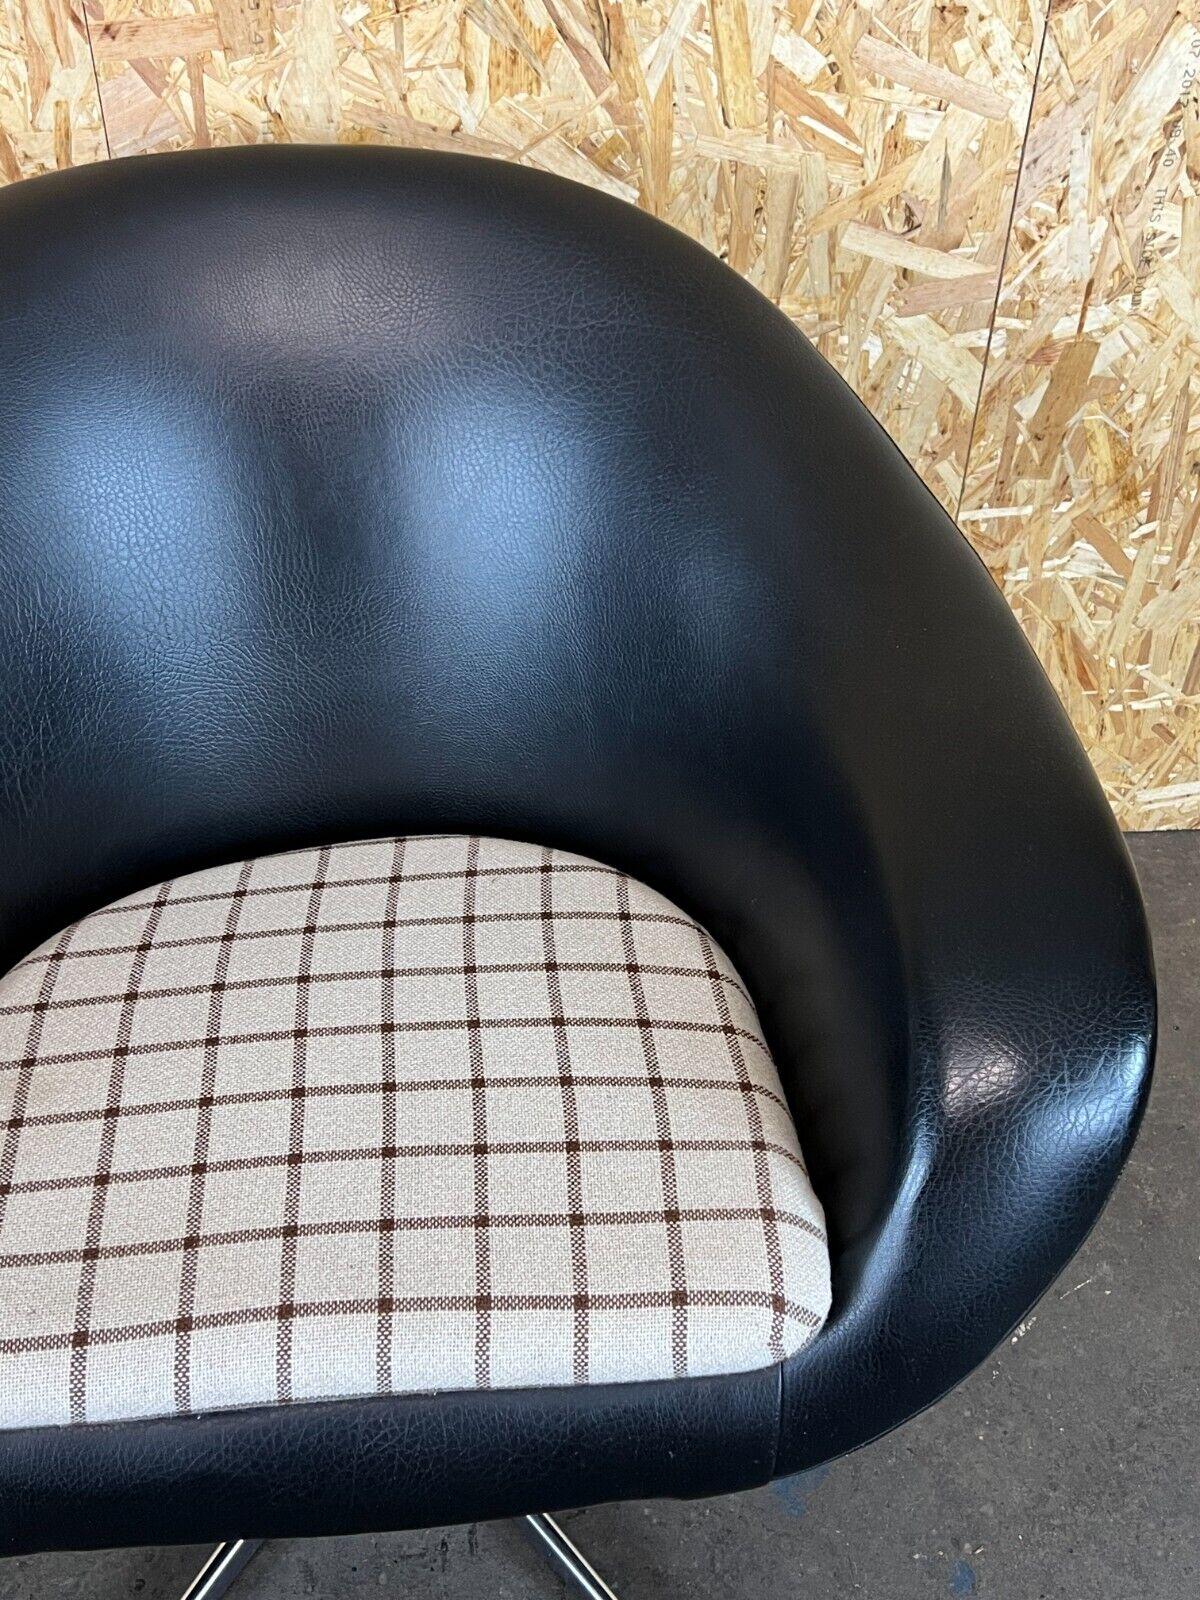 60s 70s Armchair Balloon Chair Cocktail Armchair Mid-Century Design In Good Condition For Sale In Neuenkirchen, NI